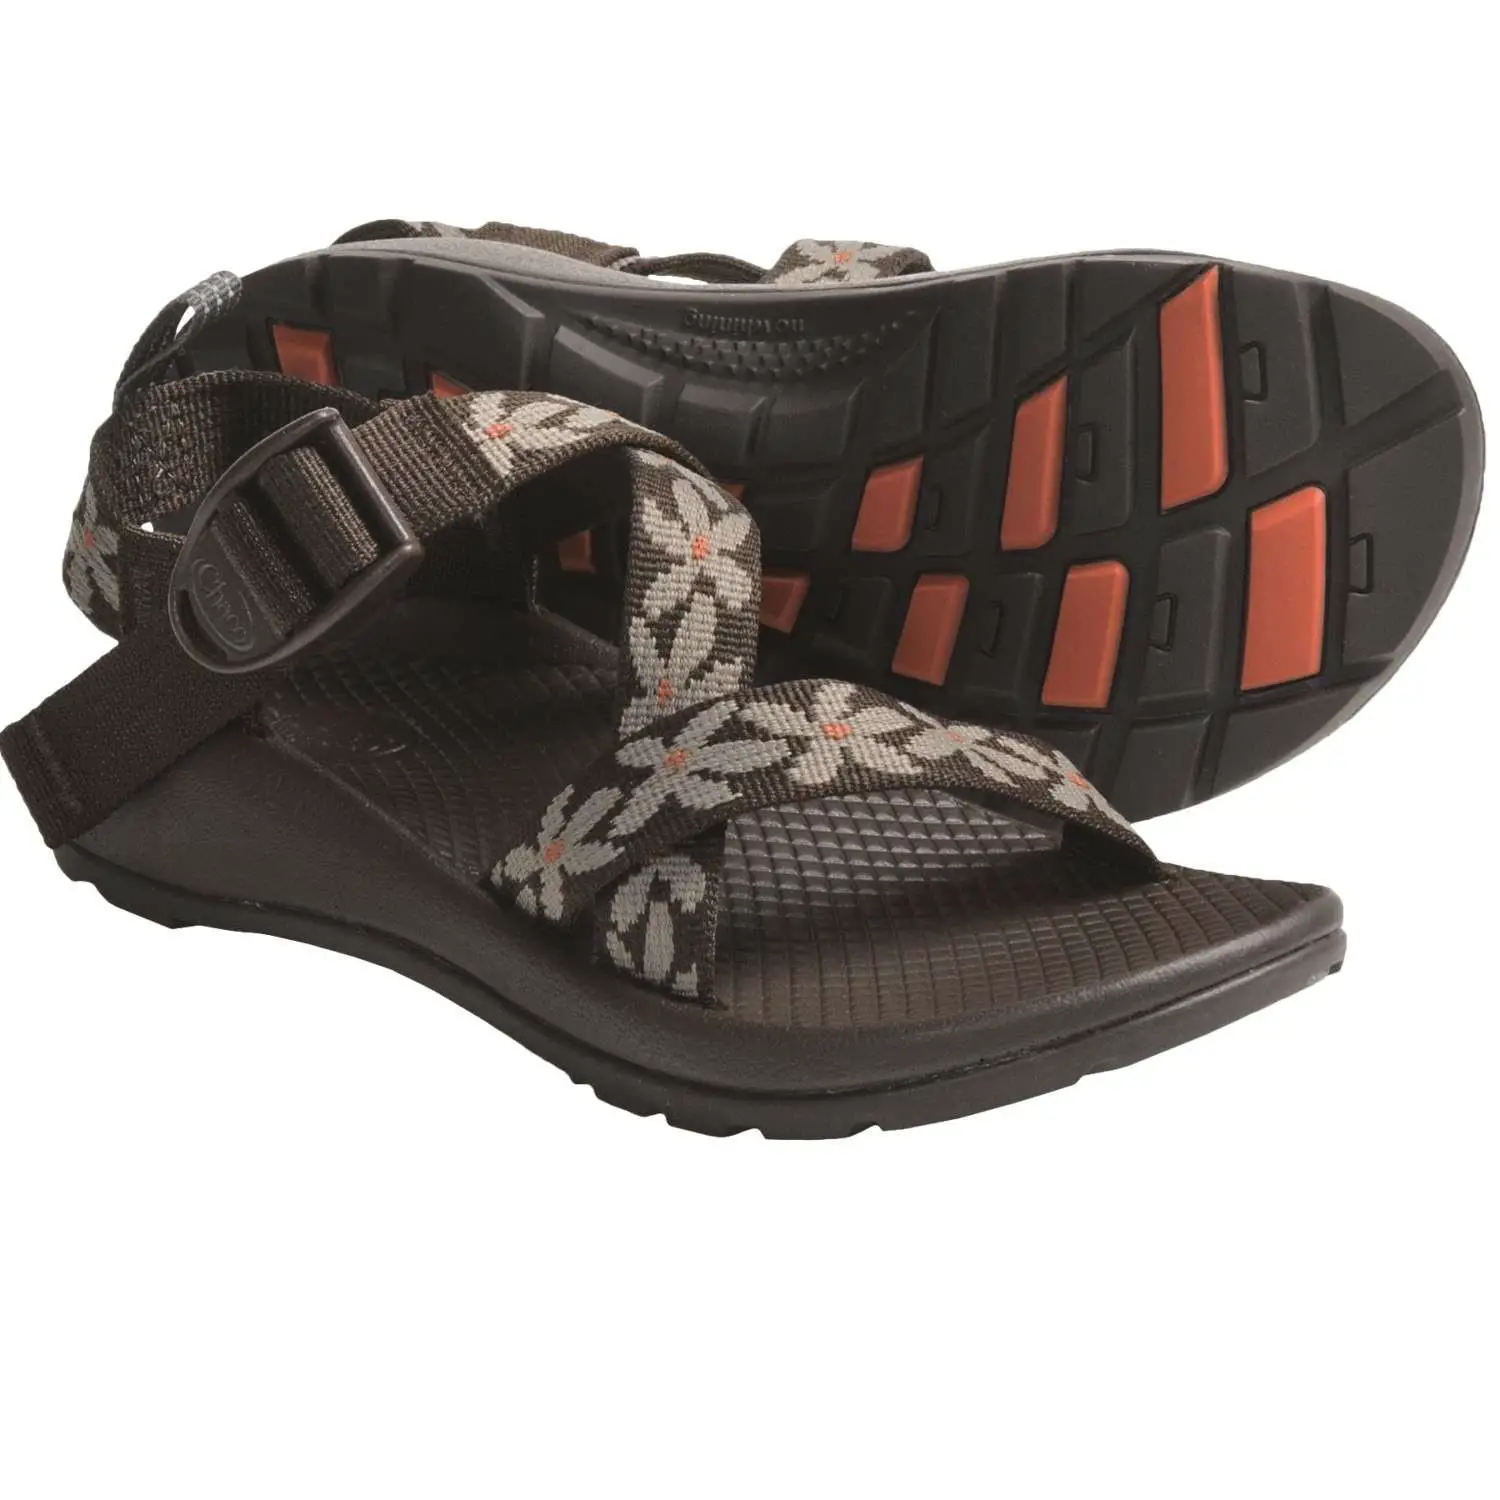 Where To Buy Chaco Sandals Kids ~ Outdoor Sandals